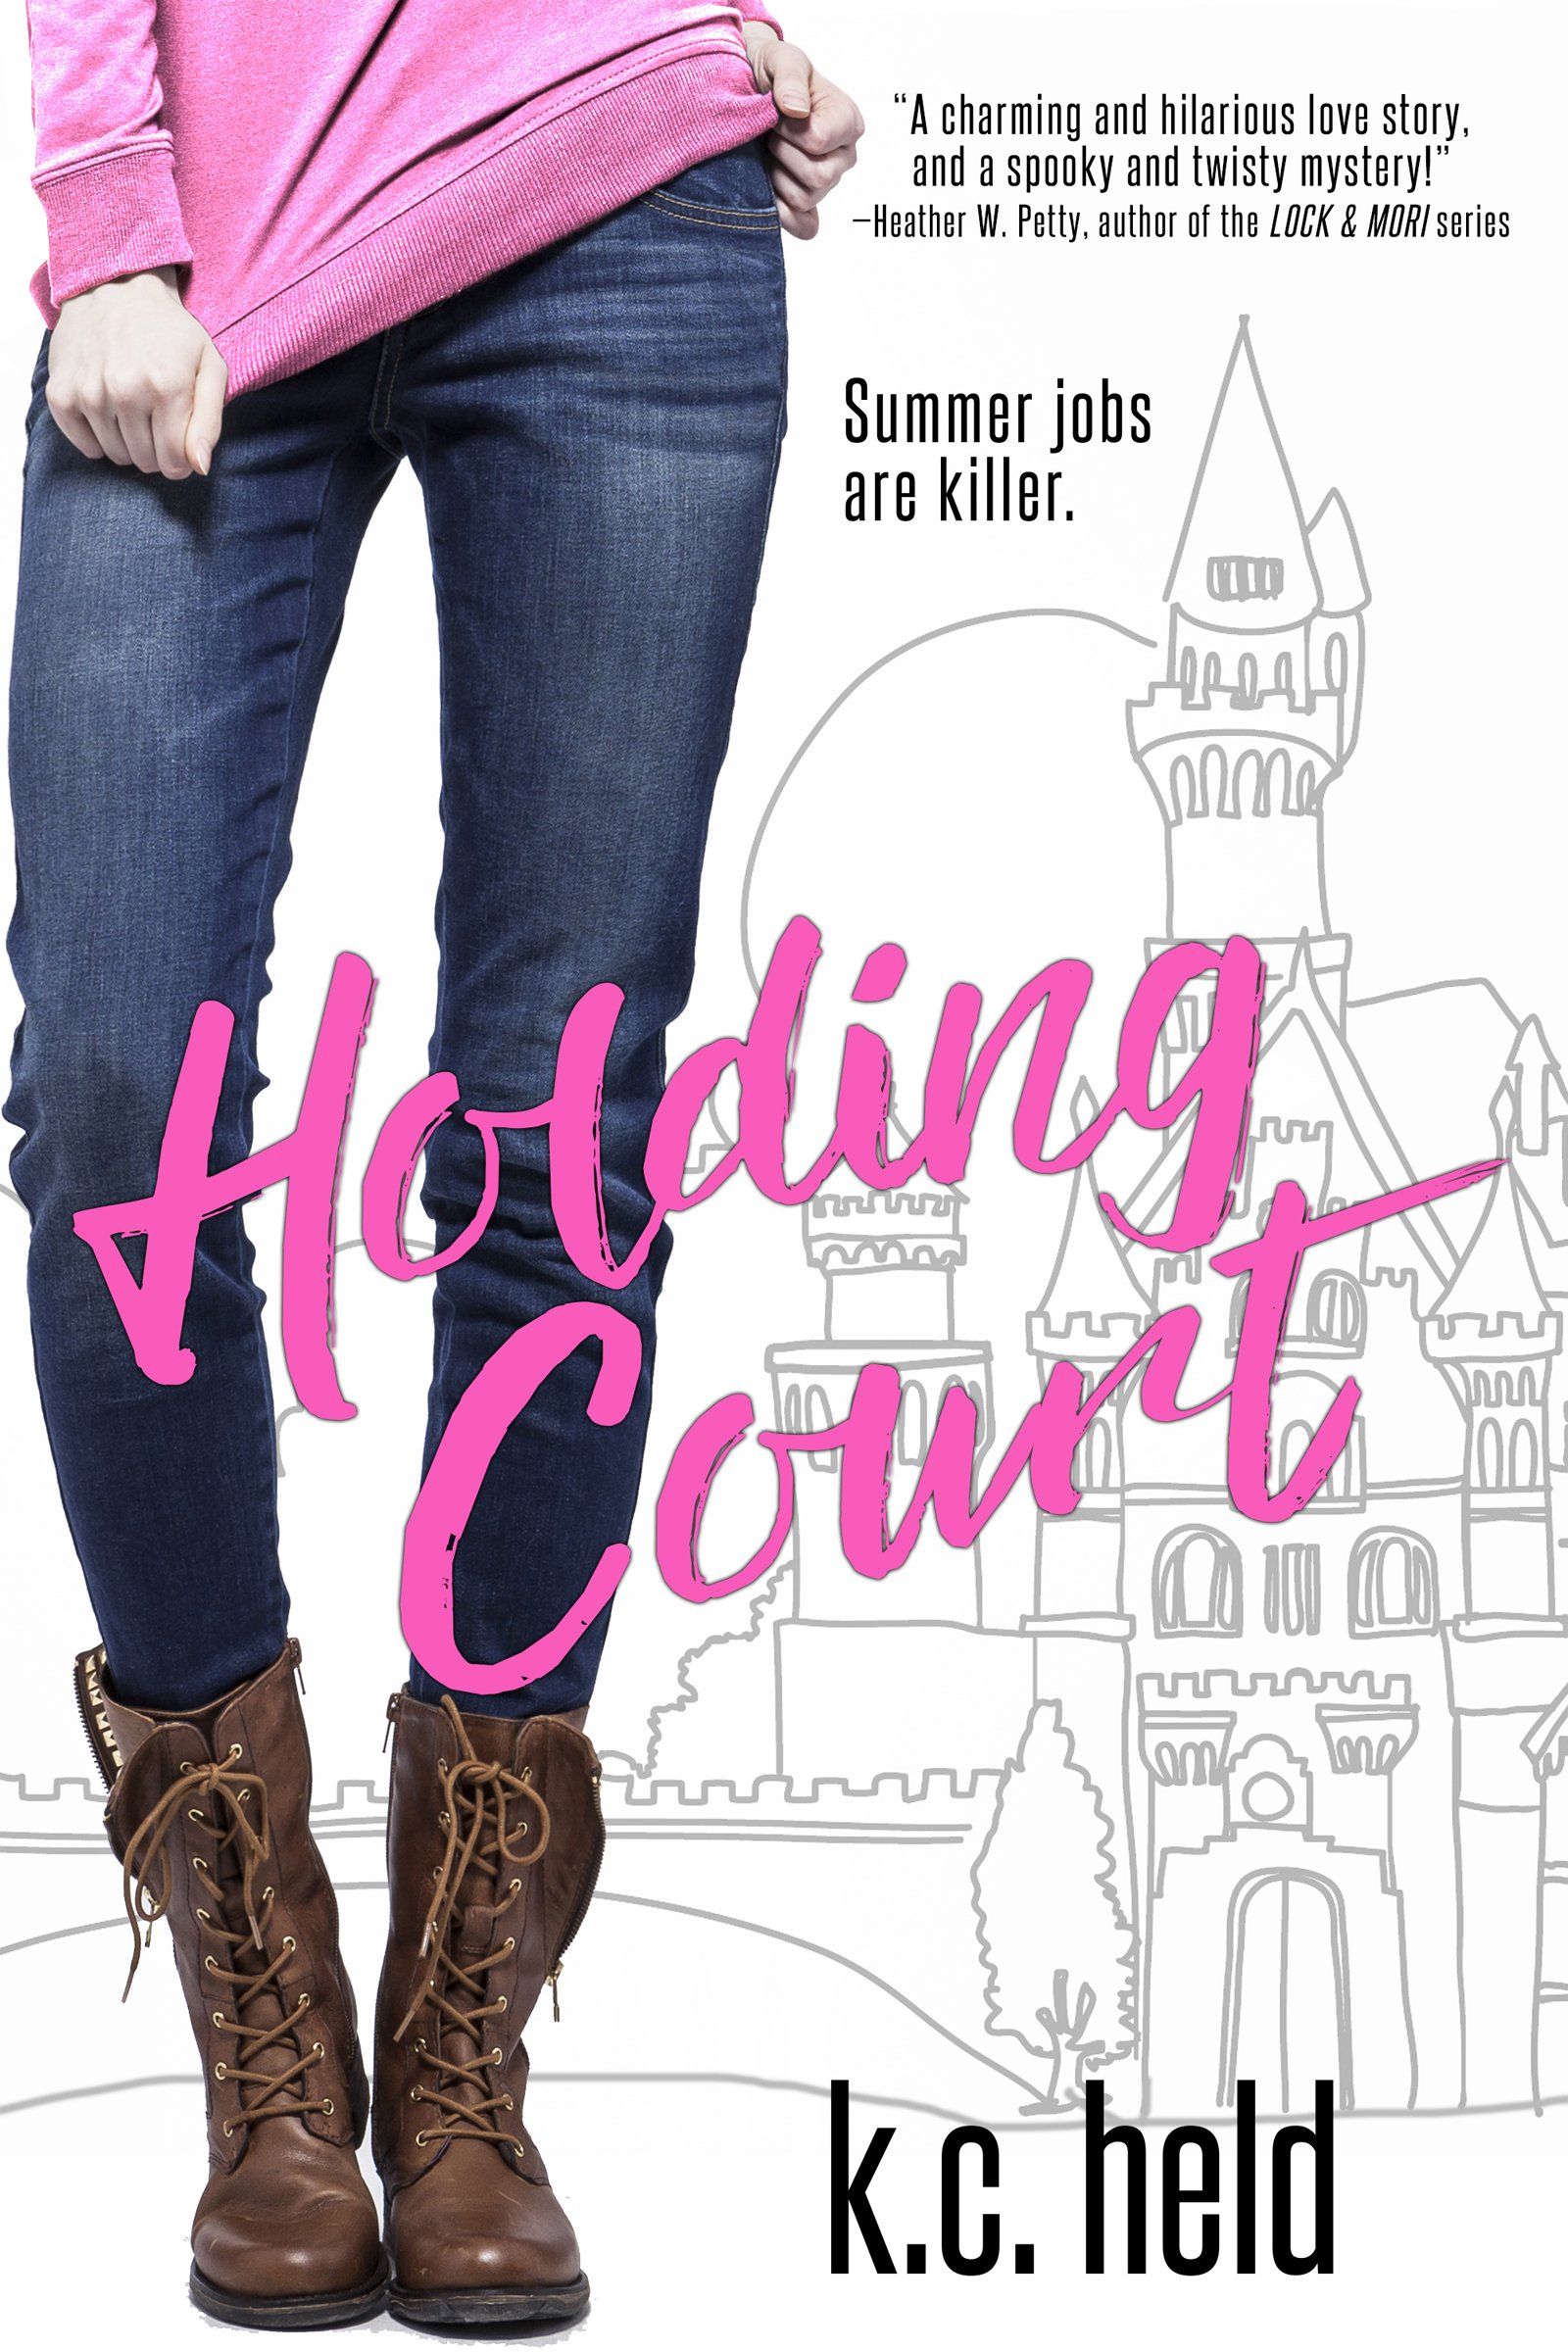 Book Review: Holding Court by K.C. Held